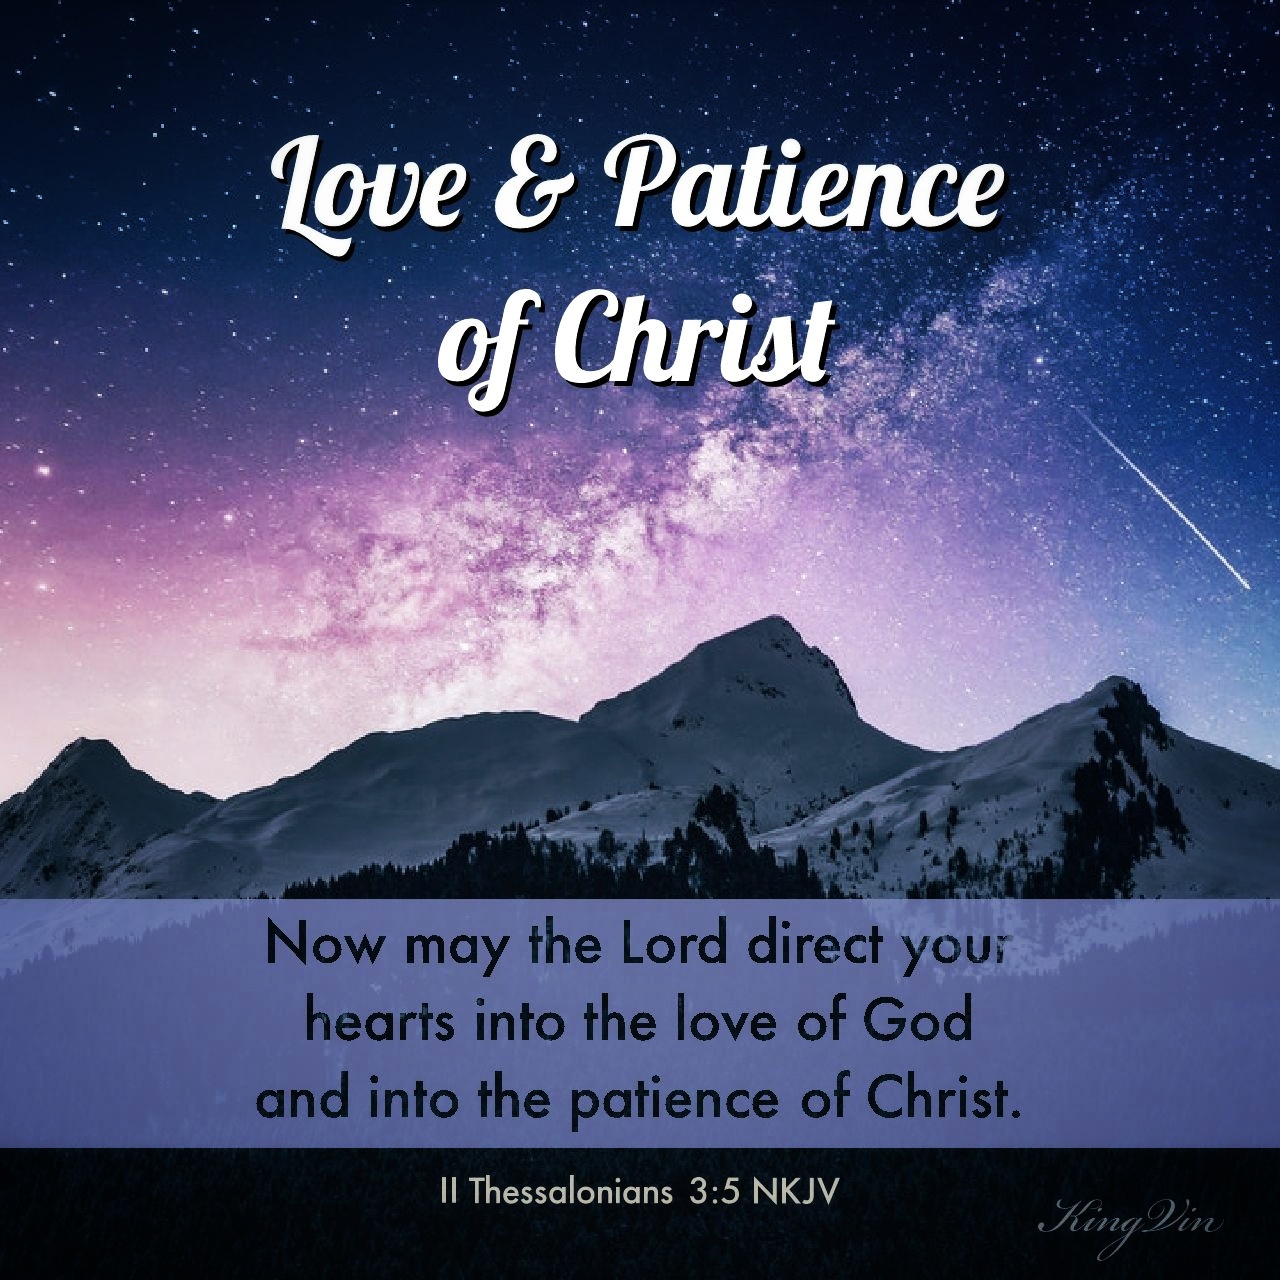 Now may the Lord direct your hearts into the love of God and into the patience of Christ. II Thessalonians 3:5